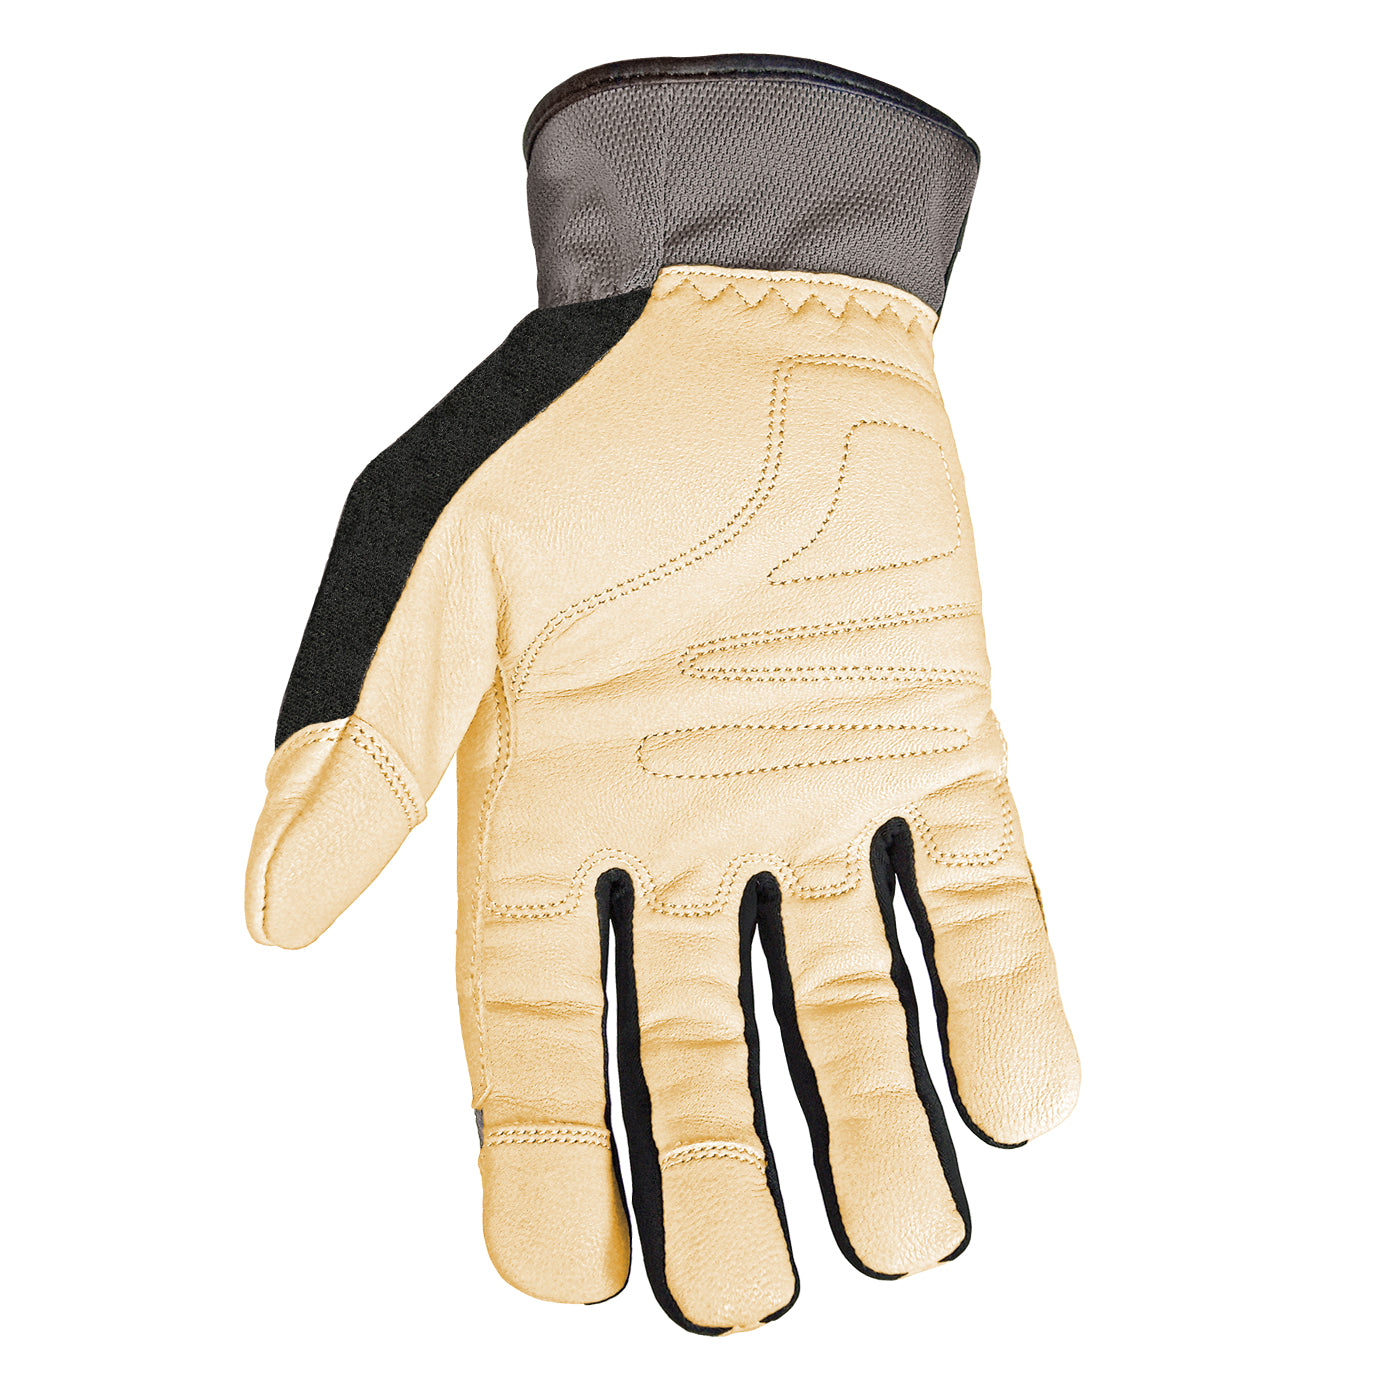 12-3180-70 Youngstown Hybrid Plus Glove - Main image